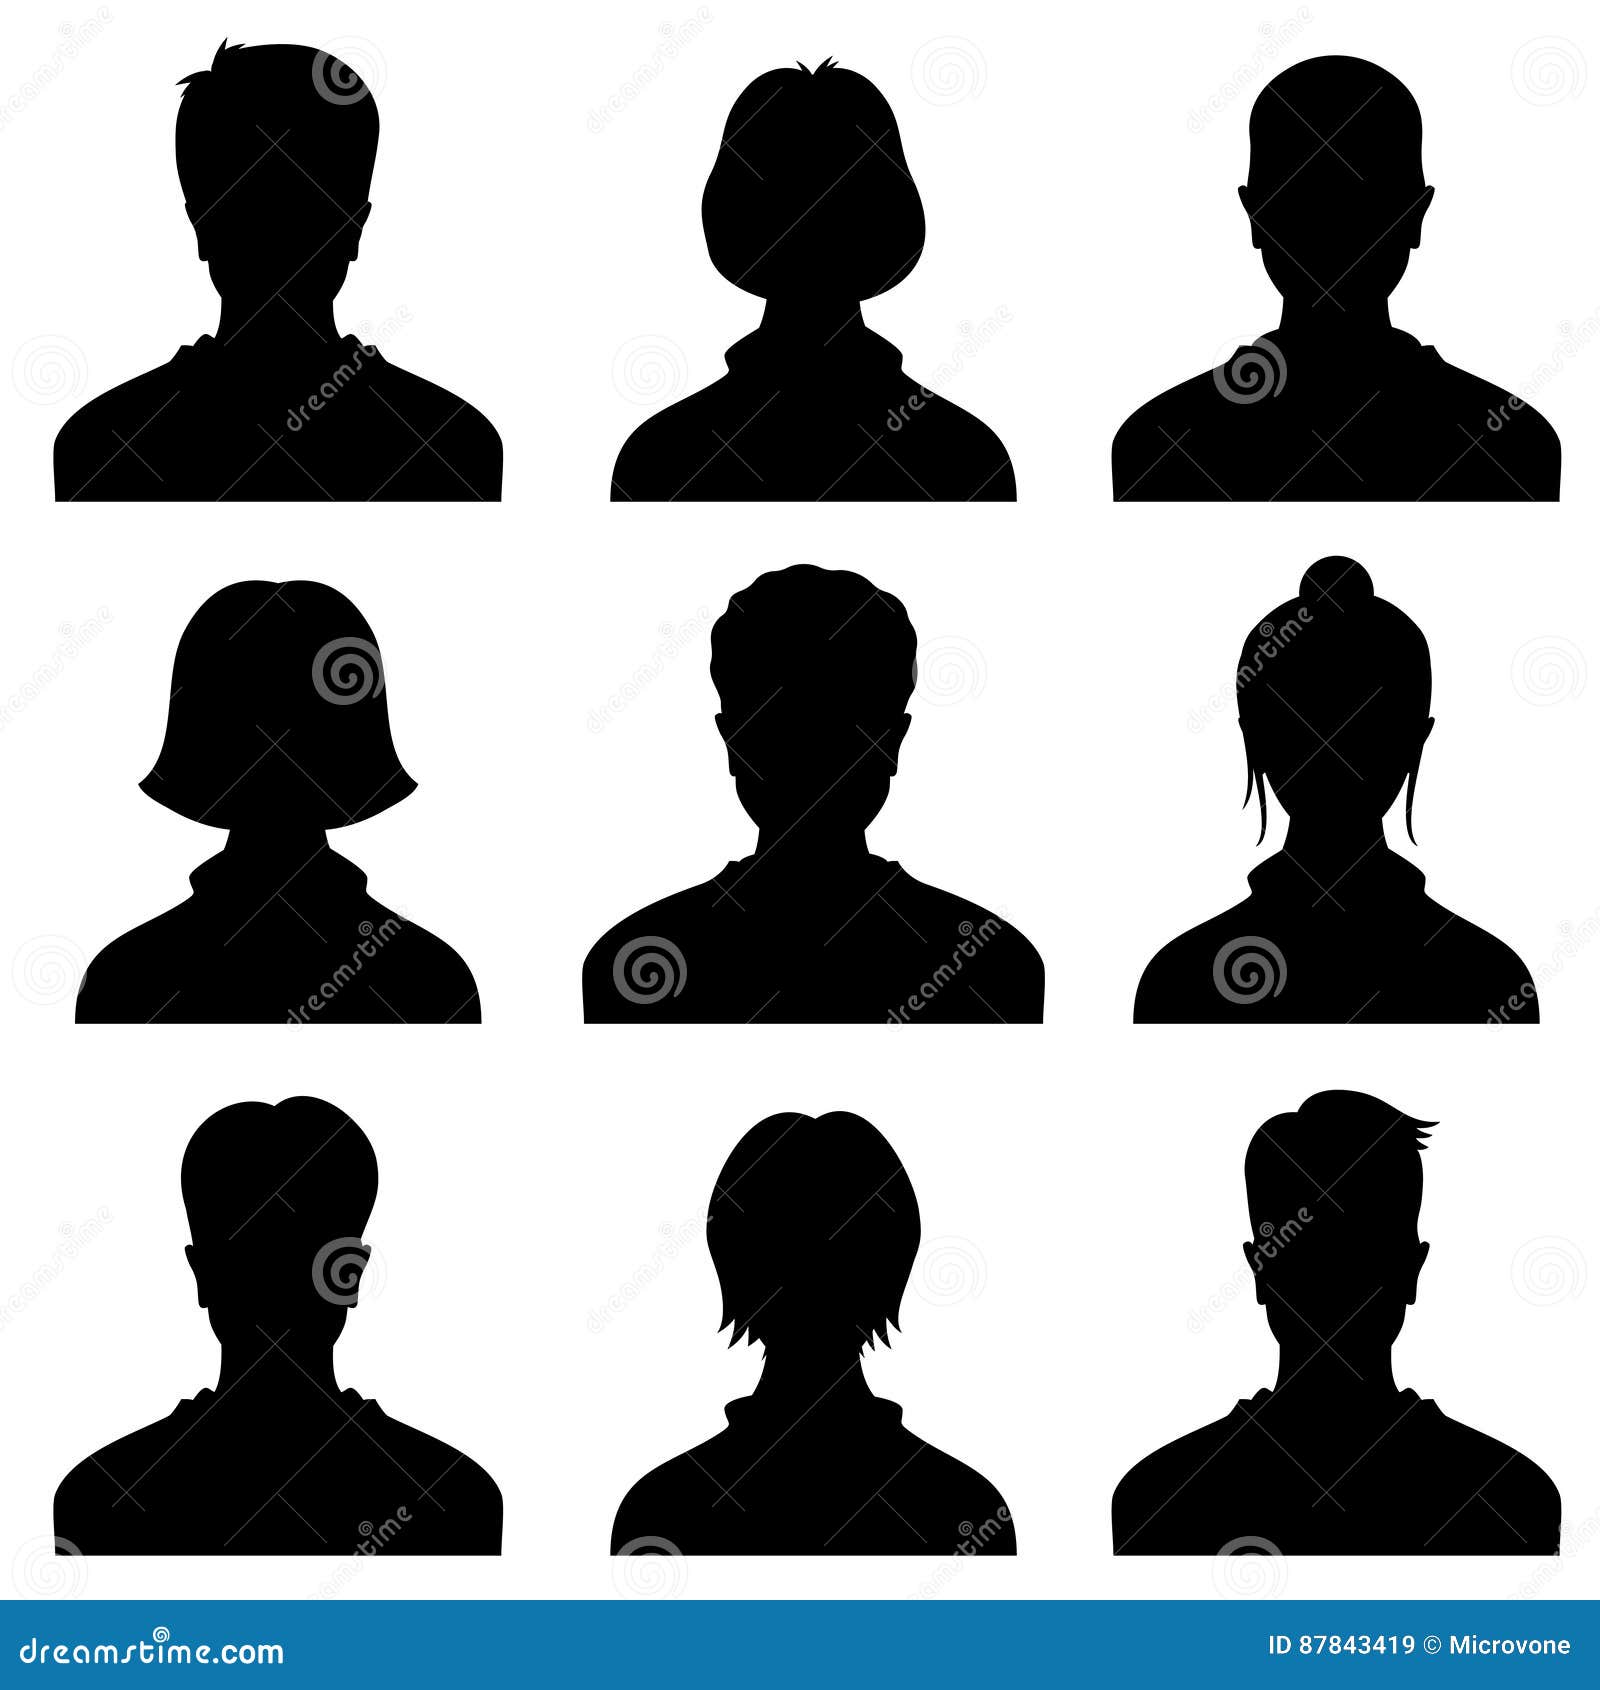 male and female head silhouettes avatar, profile  icons, people portraits